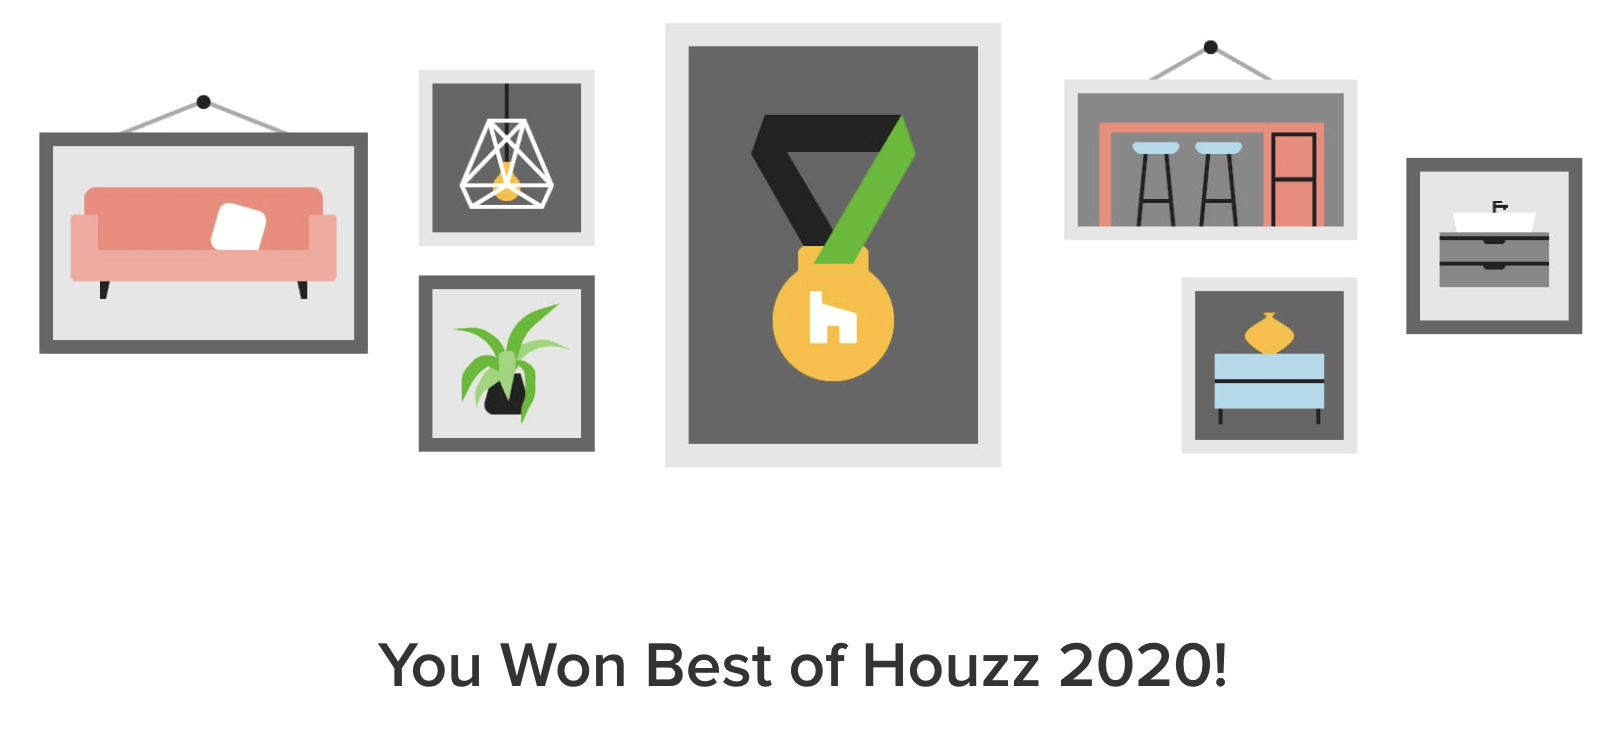 This is how Houzz told me I won an award this year 2020 - it's best designer